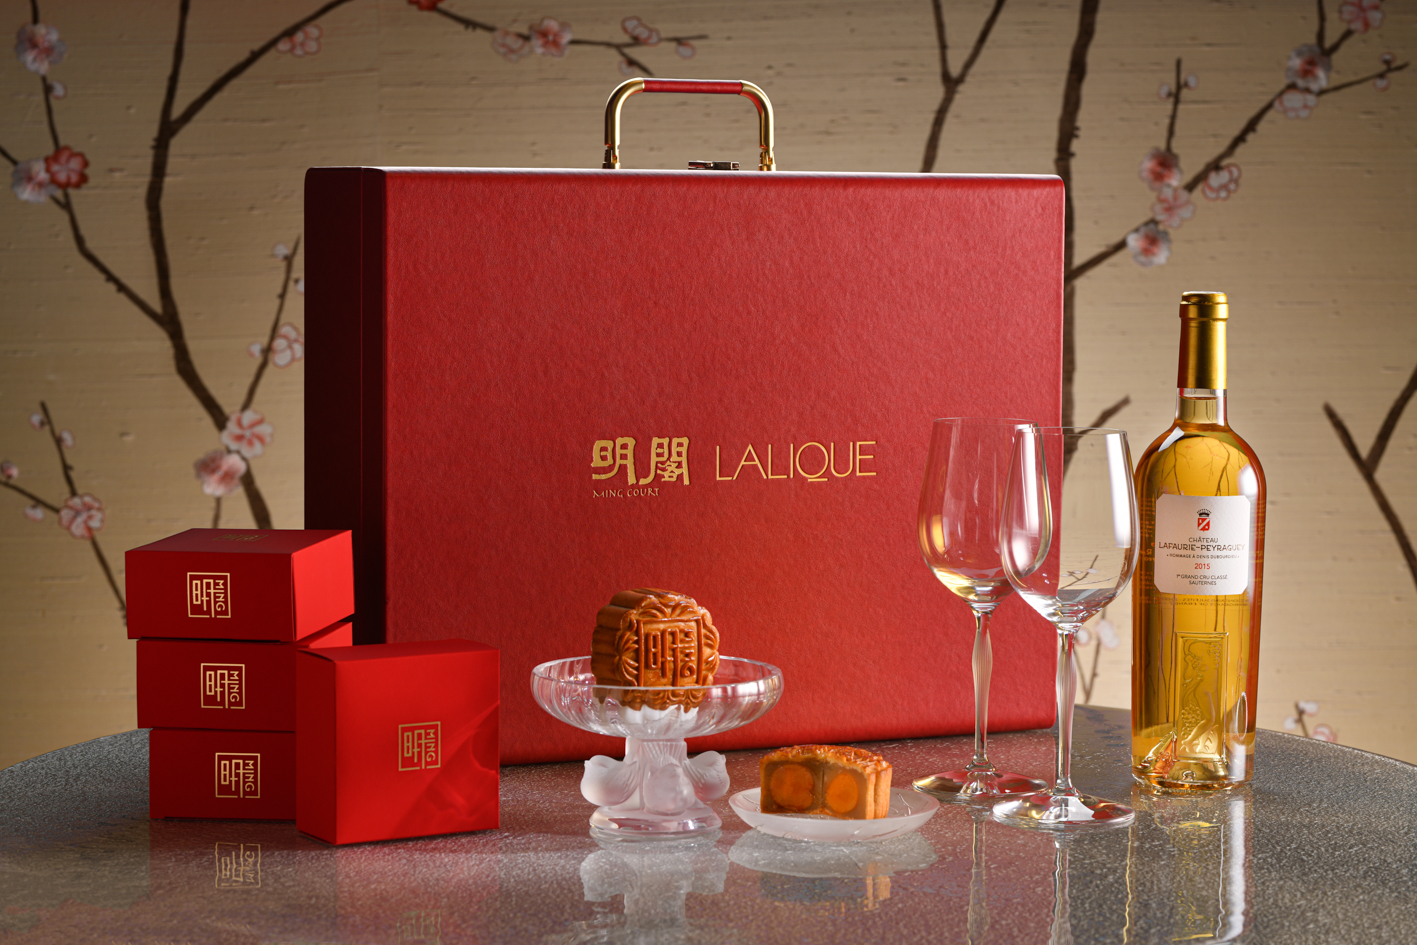 Sharing the same level of dedication to perfection, two renowned brands, MICHELIN-starred Cantonese restaurant Ming Court and esteemed French crystal brand LALIQUE, join hands to introduce a limited-edition mooncake gift box, ultimately elevating the experience of savouring traditional Chinese delicacies.